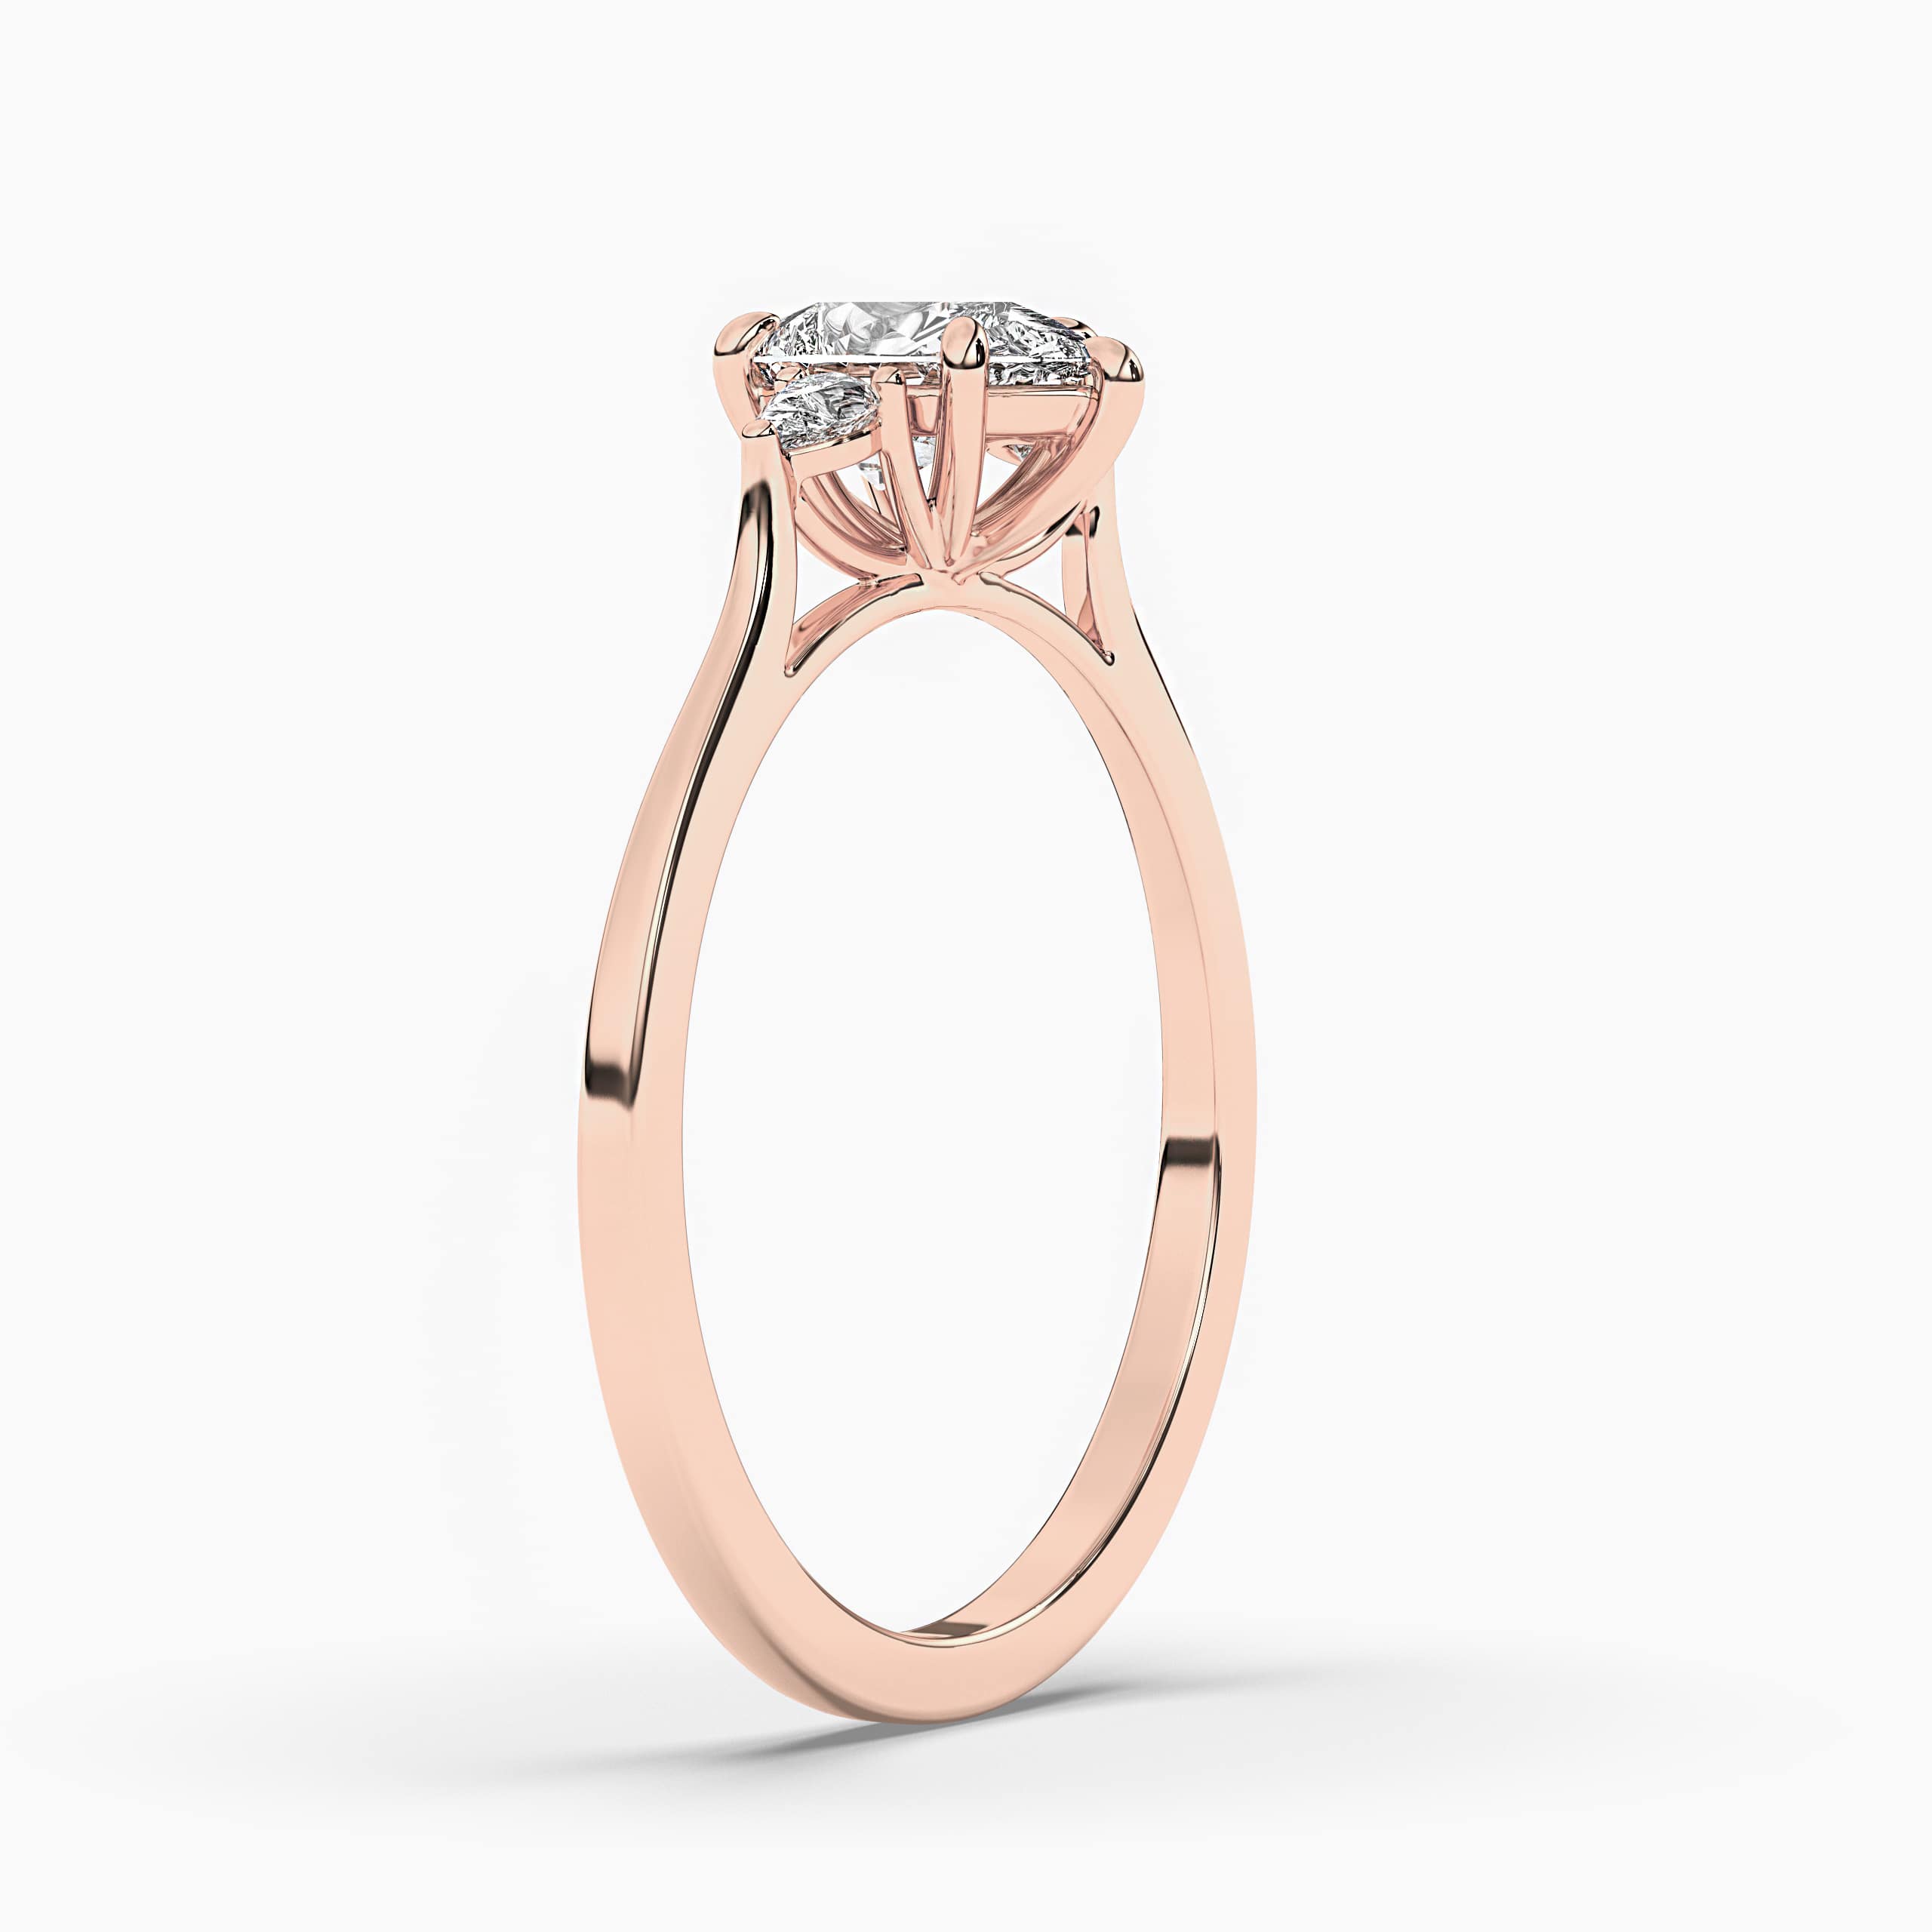 EE-STONE ENGAGEMENT RING SET IN ROSE GOLD WITH PEAR CUT SIDE STONES